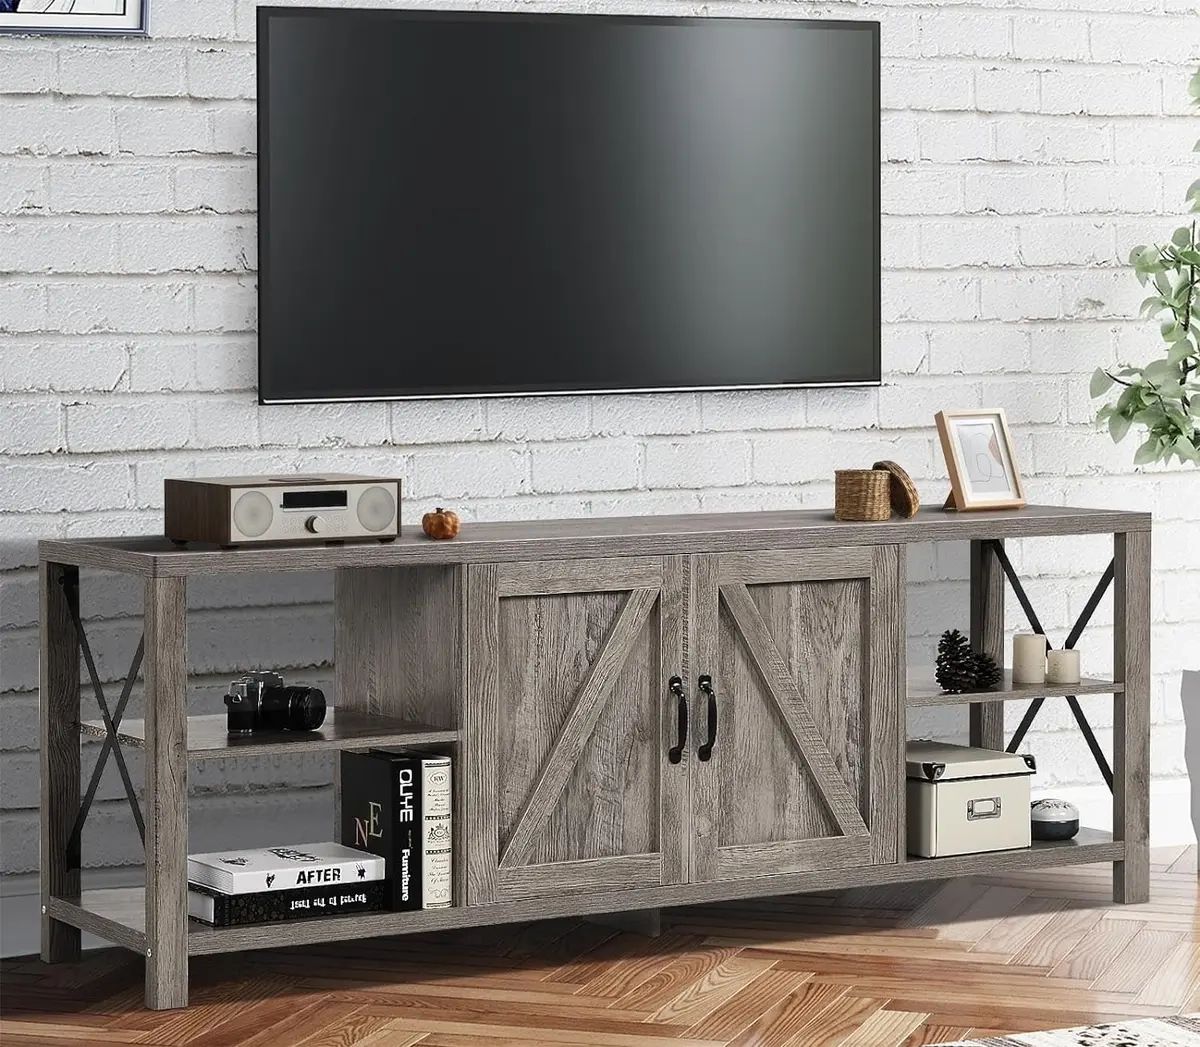 70" Farmhouse Tv Stand For 70 75 80 Inch Tv For Living Room, Industrial &  Rustic | Ebay In Farmhouse Tv Stands For 70 Inch Tv (Photo 11 of 15)